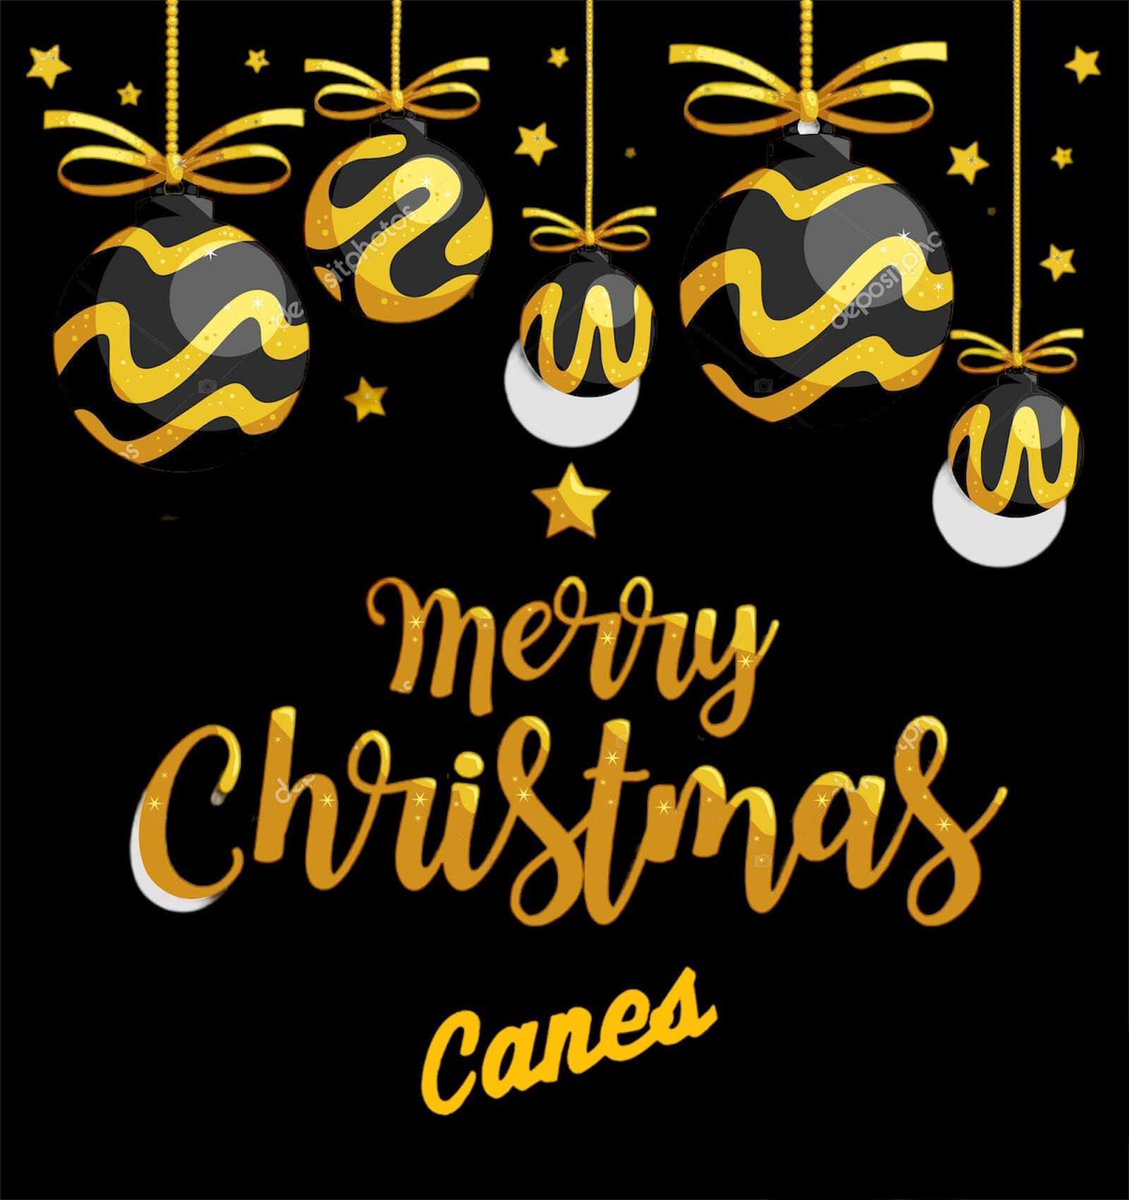 We hope our #CanesFamily is having a great Christmas season!